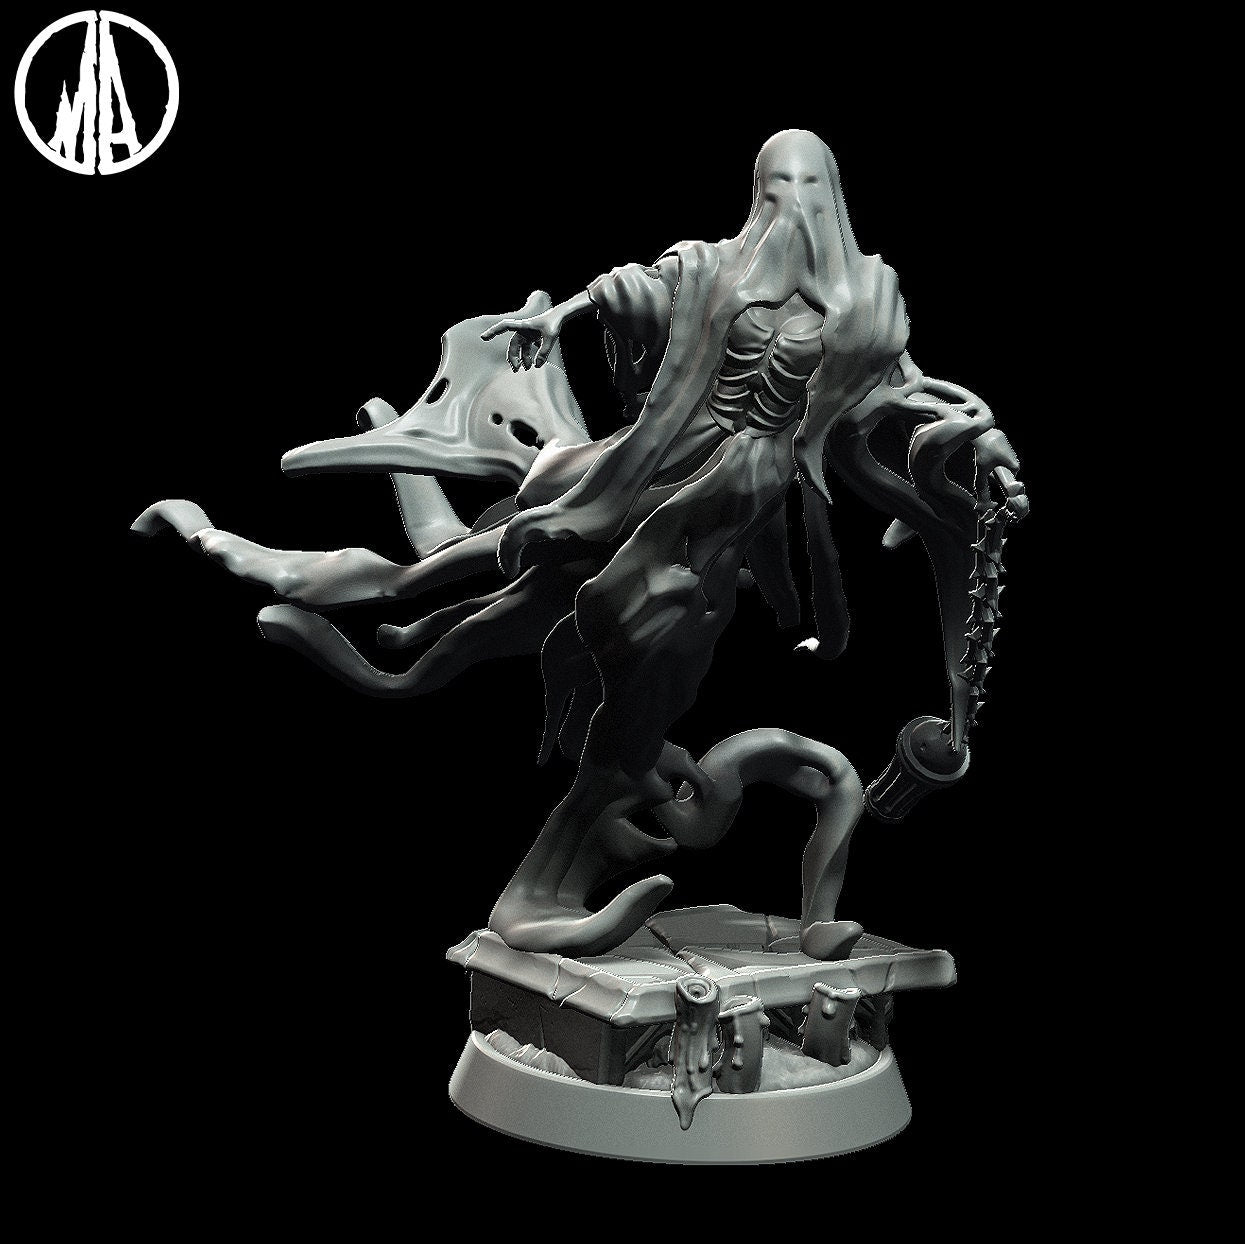 Wailing Hag | Monolith Arts | 3D Printed Resin Model | Ideal for - RPG, DnD, Table top gaming, Fantasy